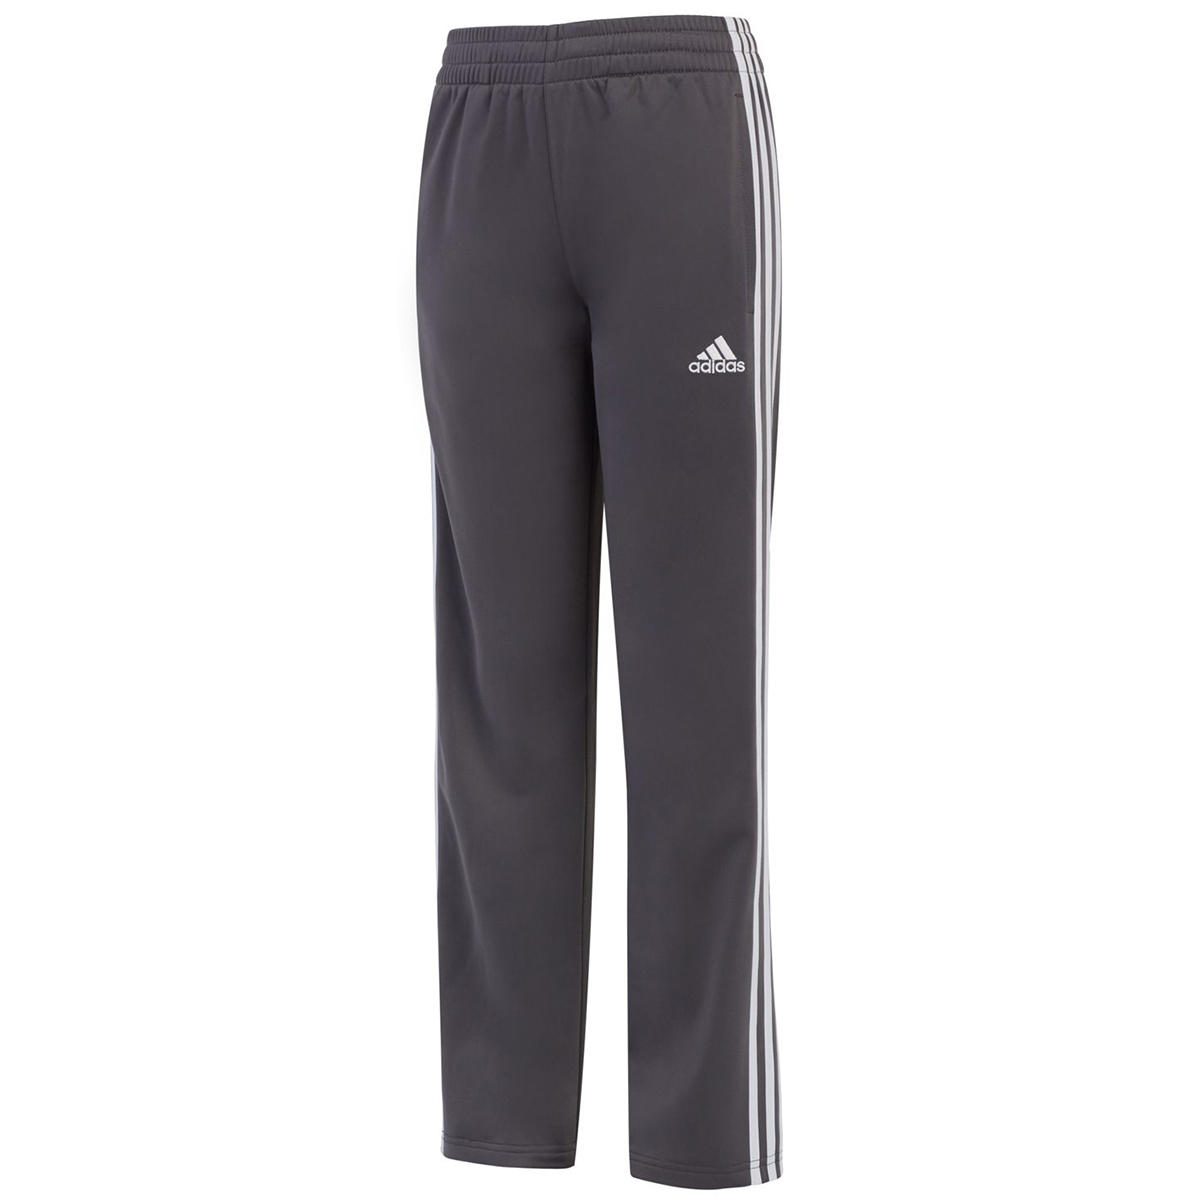 Adidas Little Boys' Iconic Tricot Pants